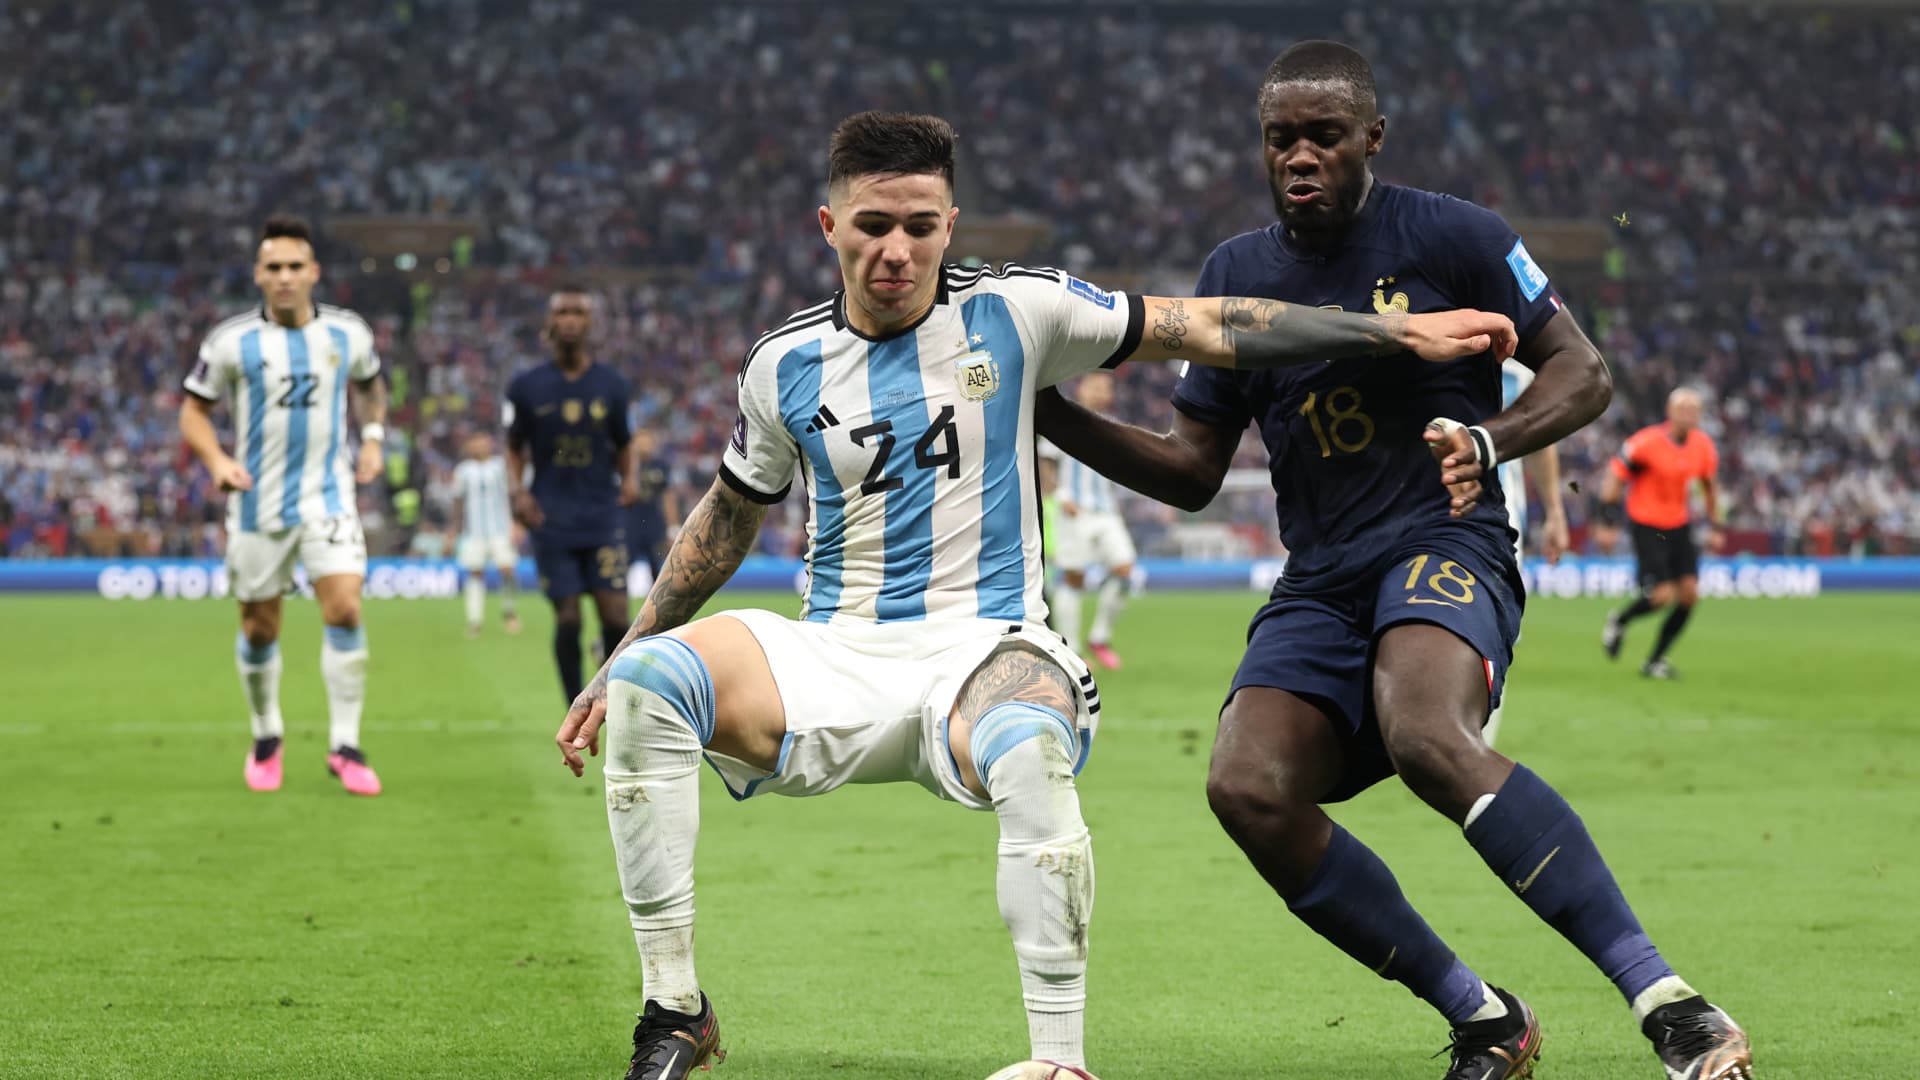 Argentina beats France 4-2 on penalties to win the World Cup